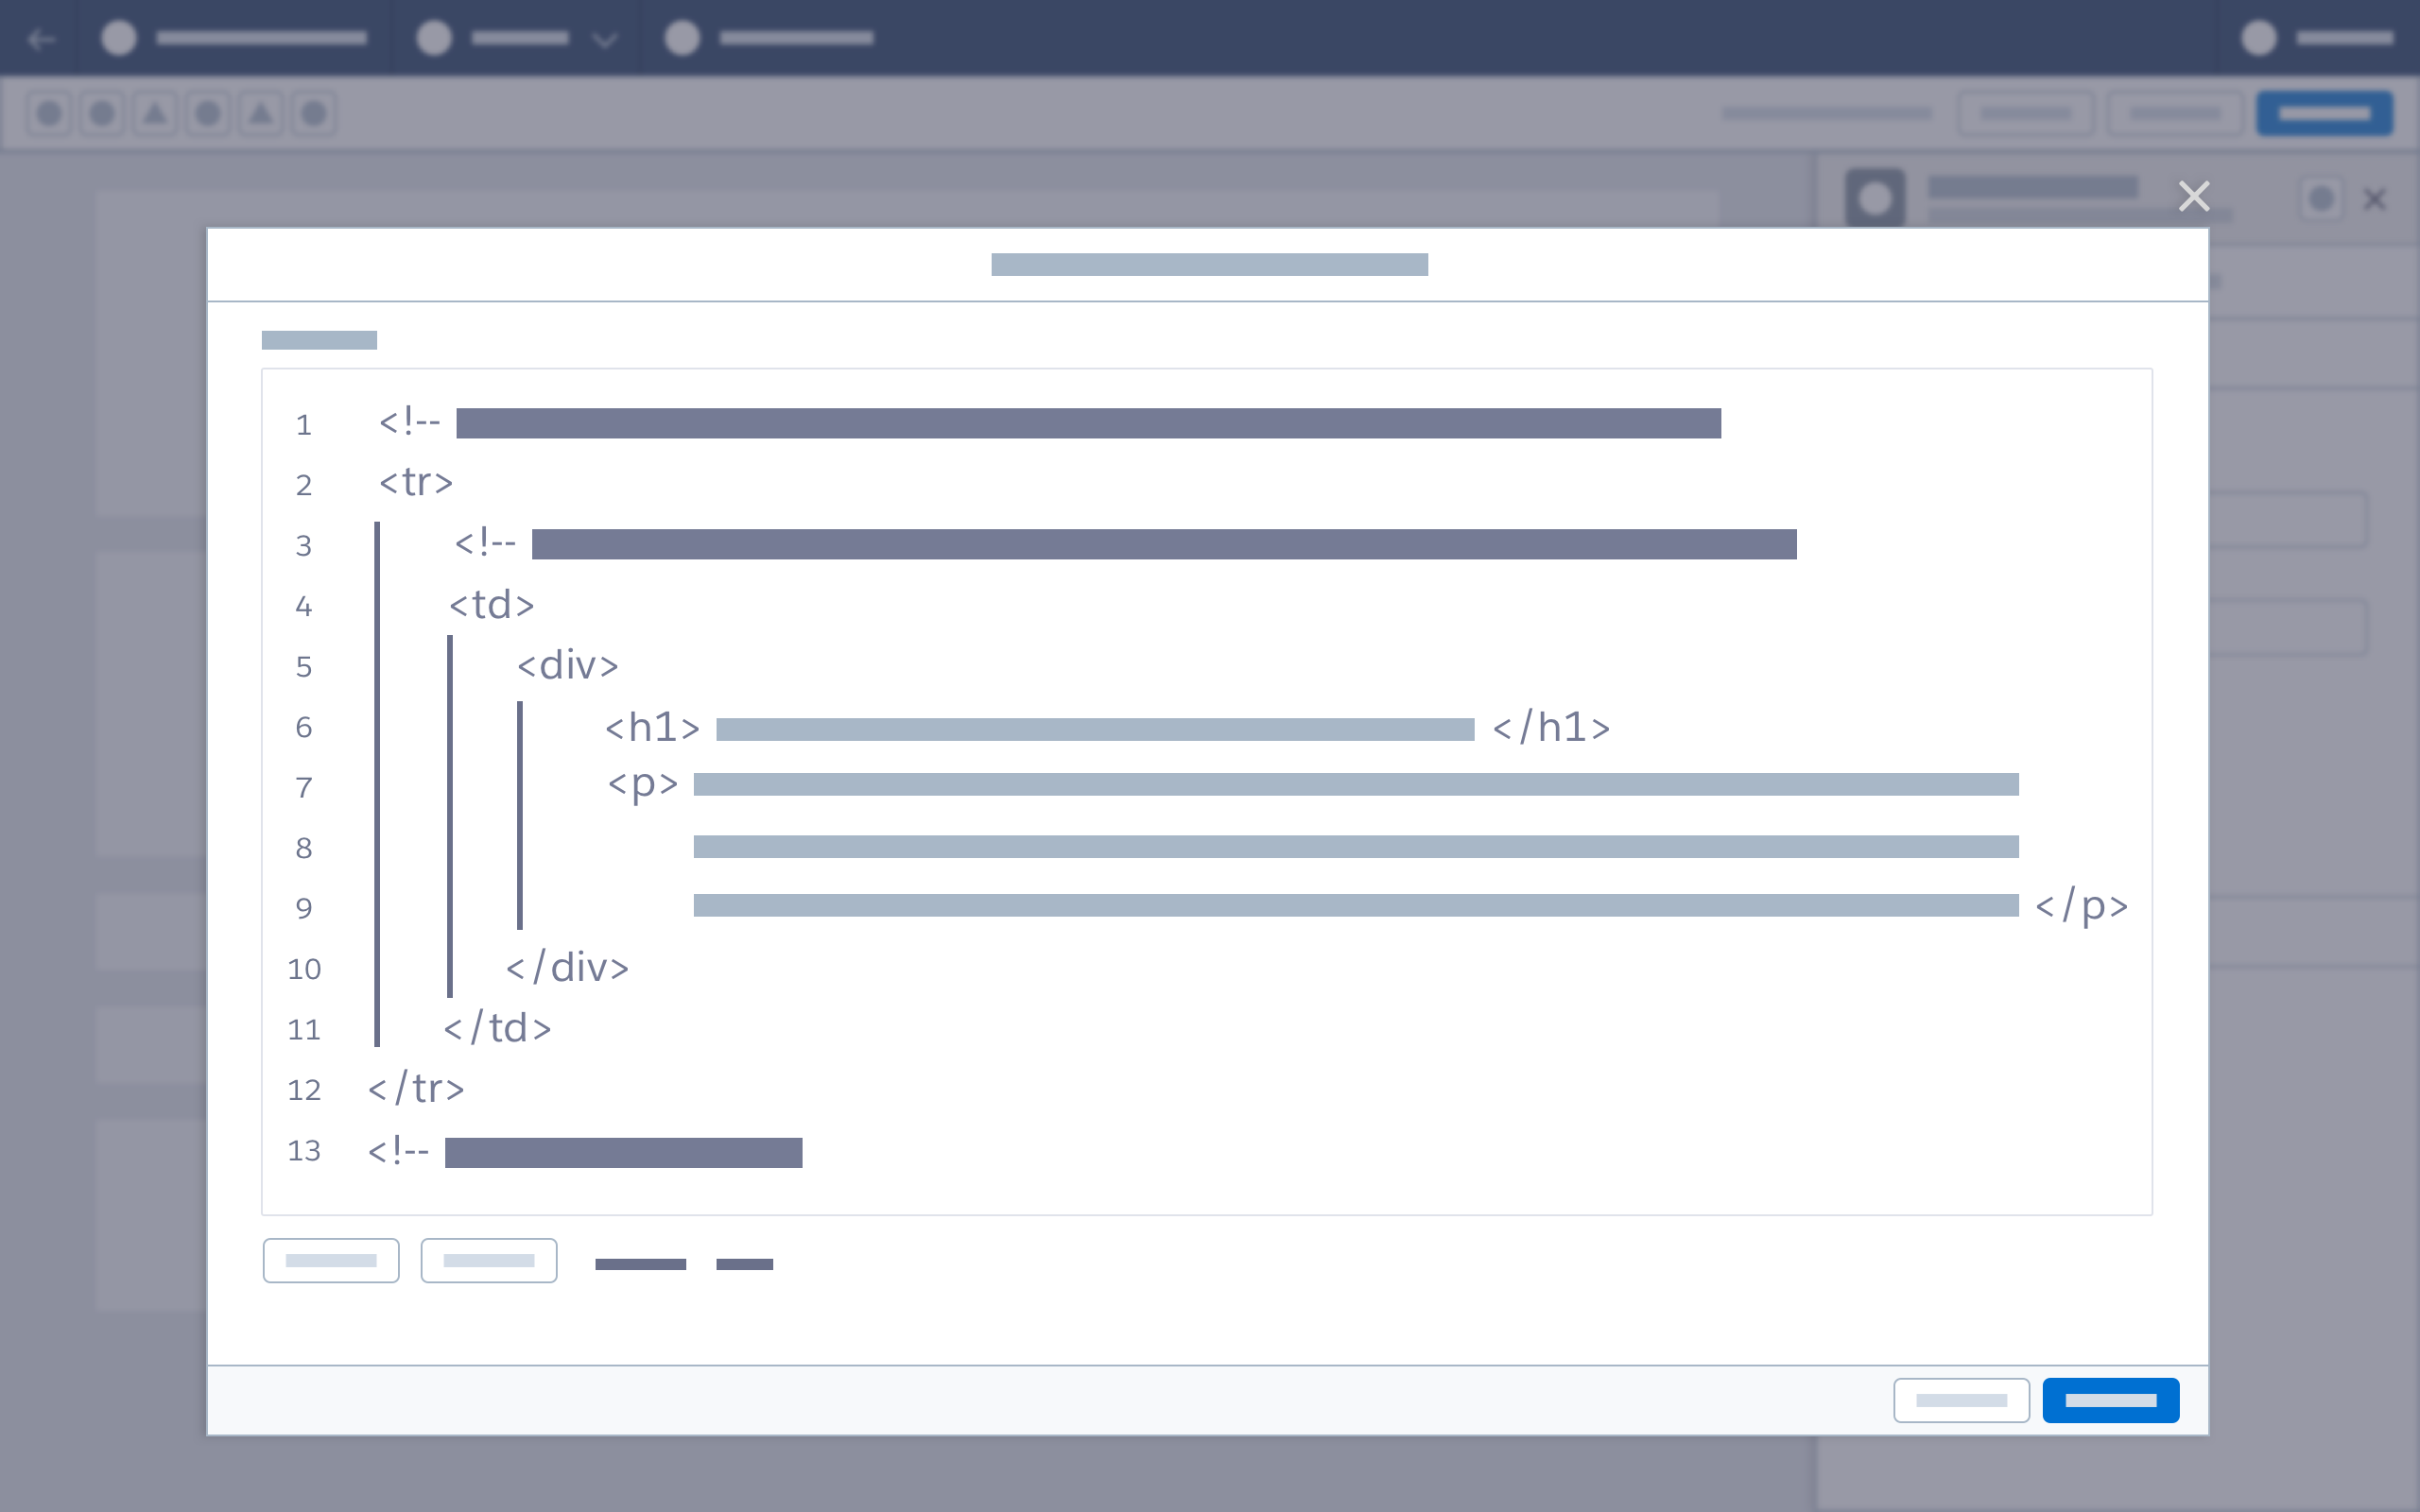 Wireframe showing an expanded view of HTML code in a modal